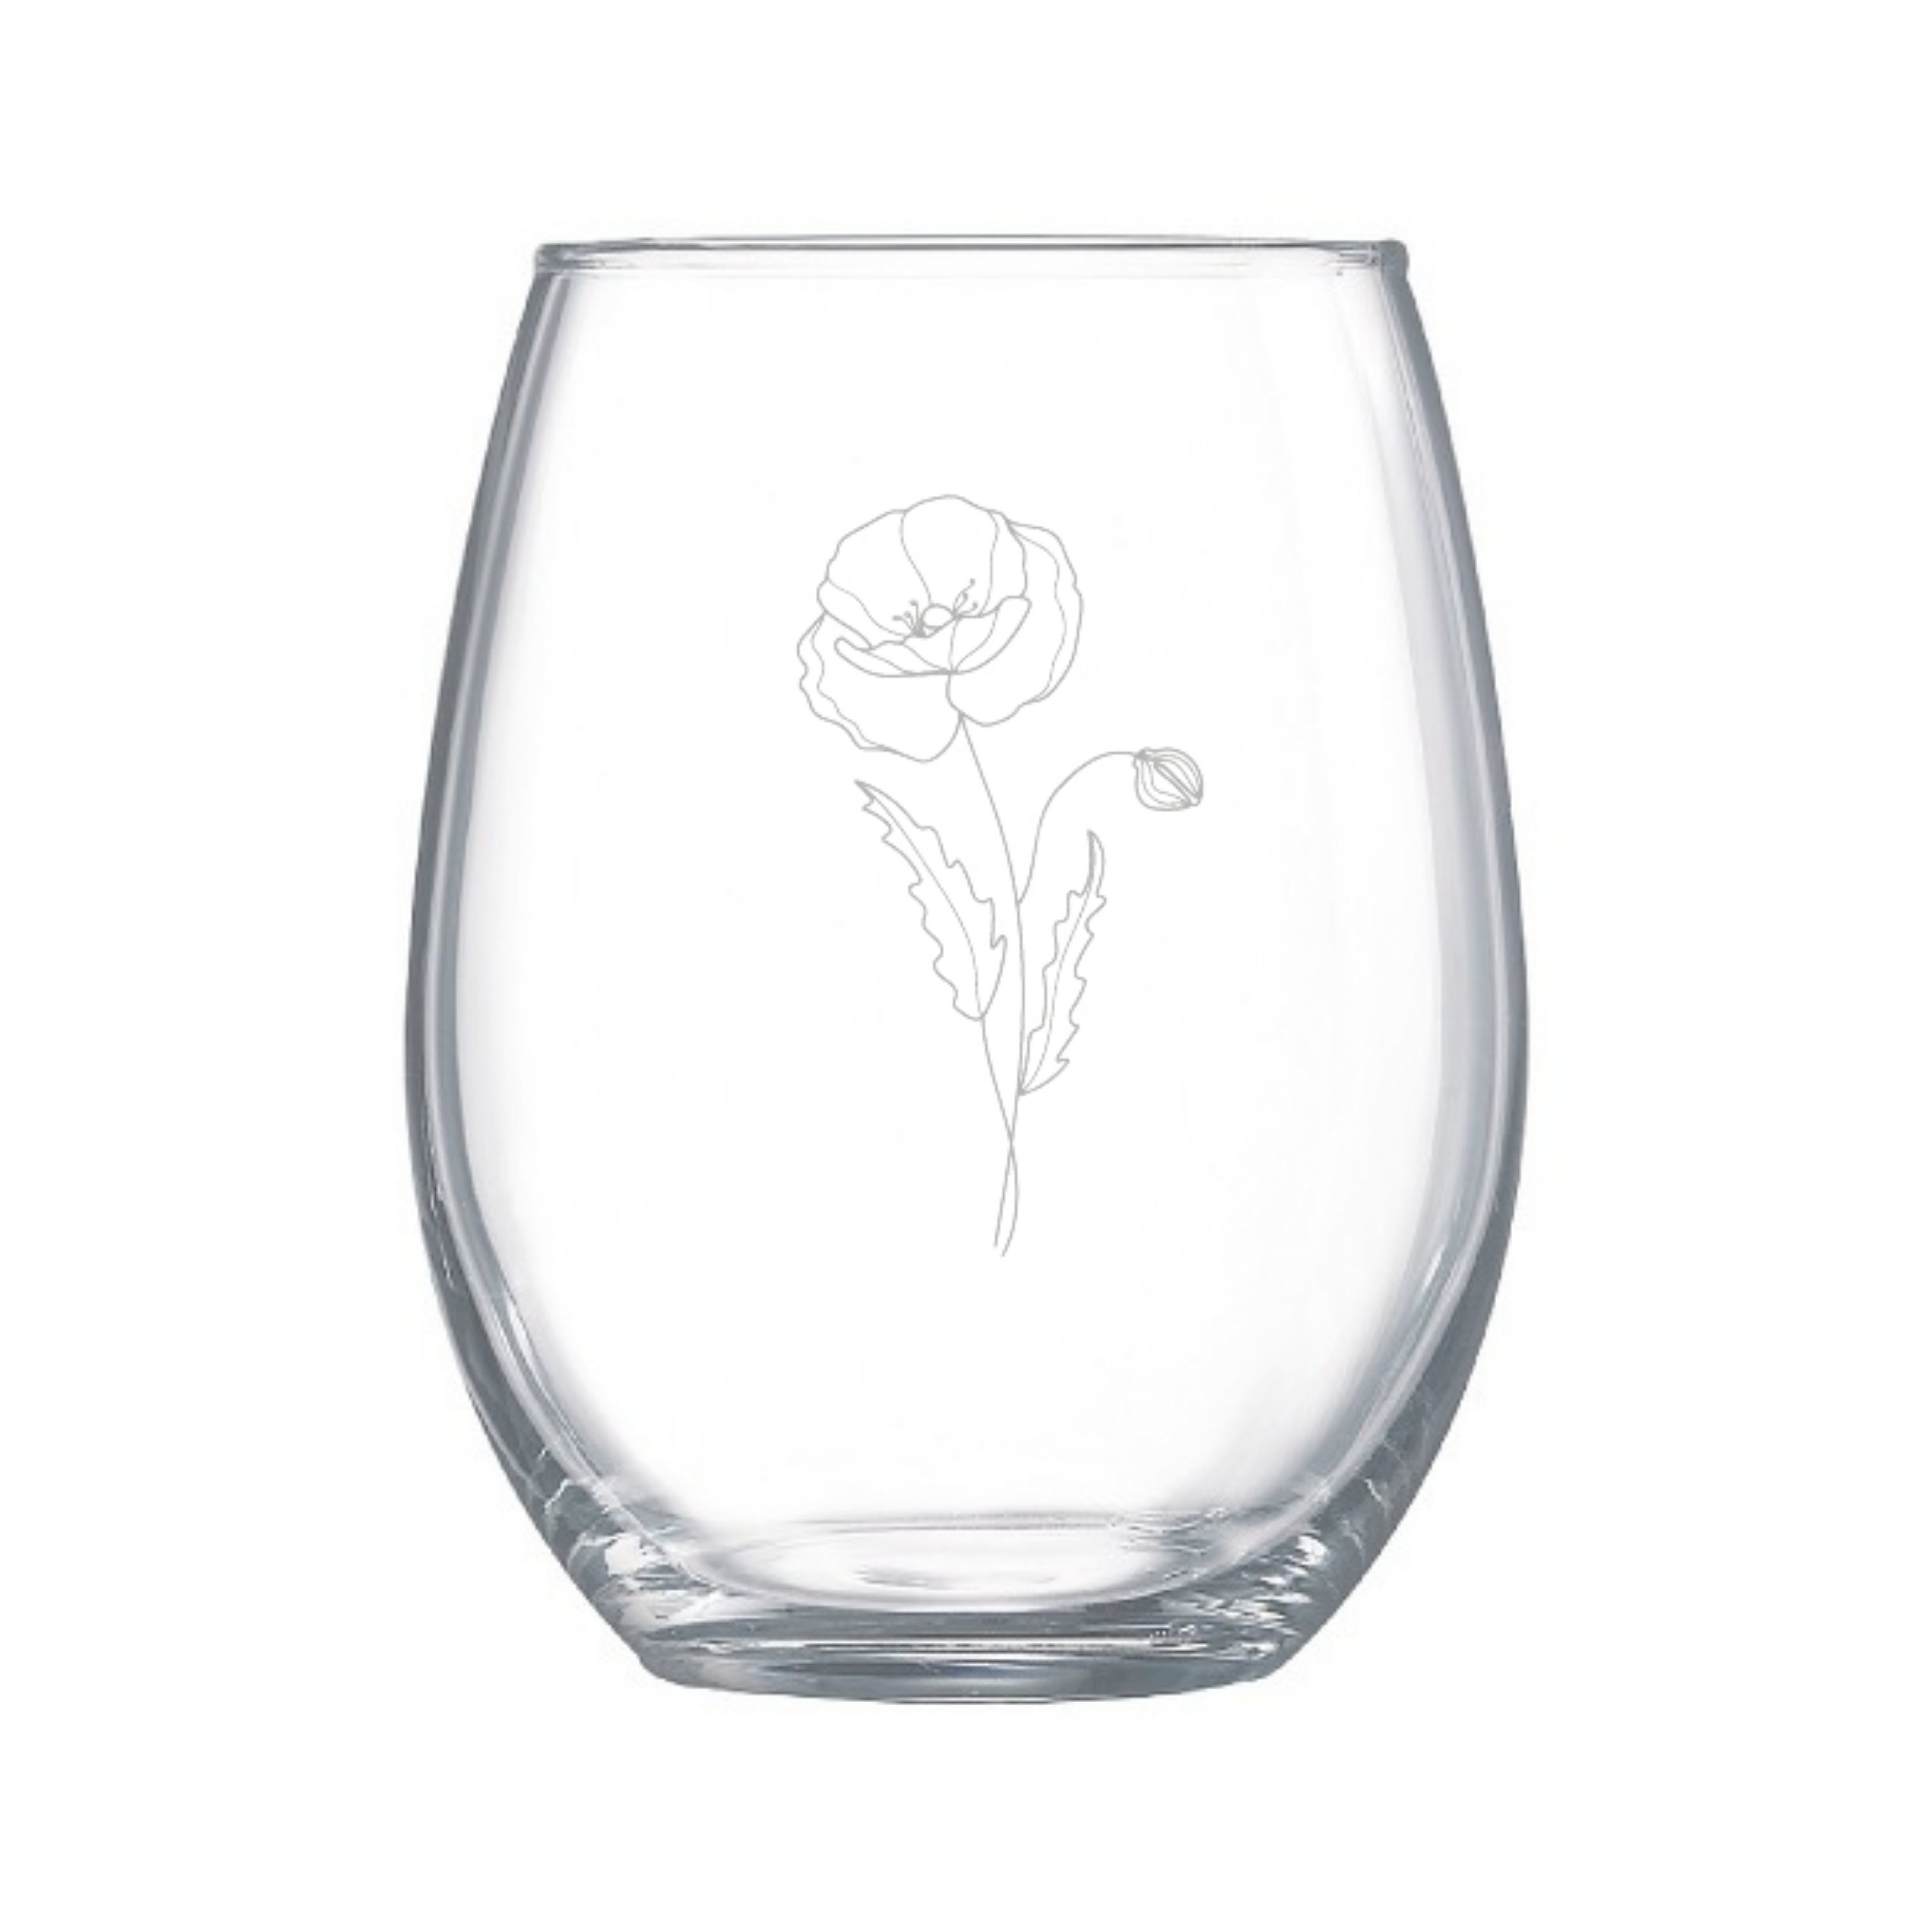 Fast Shipping BTaT - Fancy Wine Glasses, Floral Wine Glass, Set of